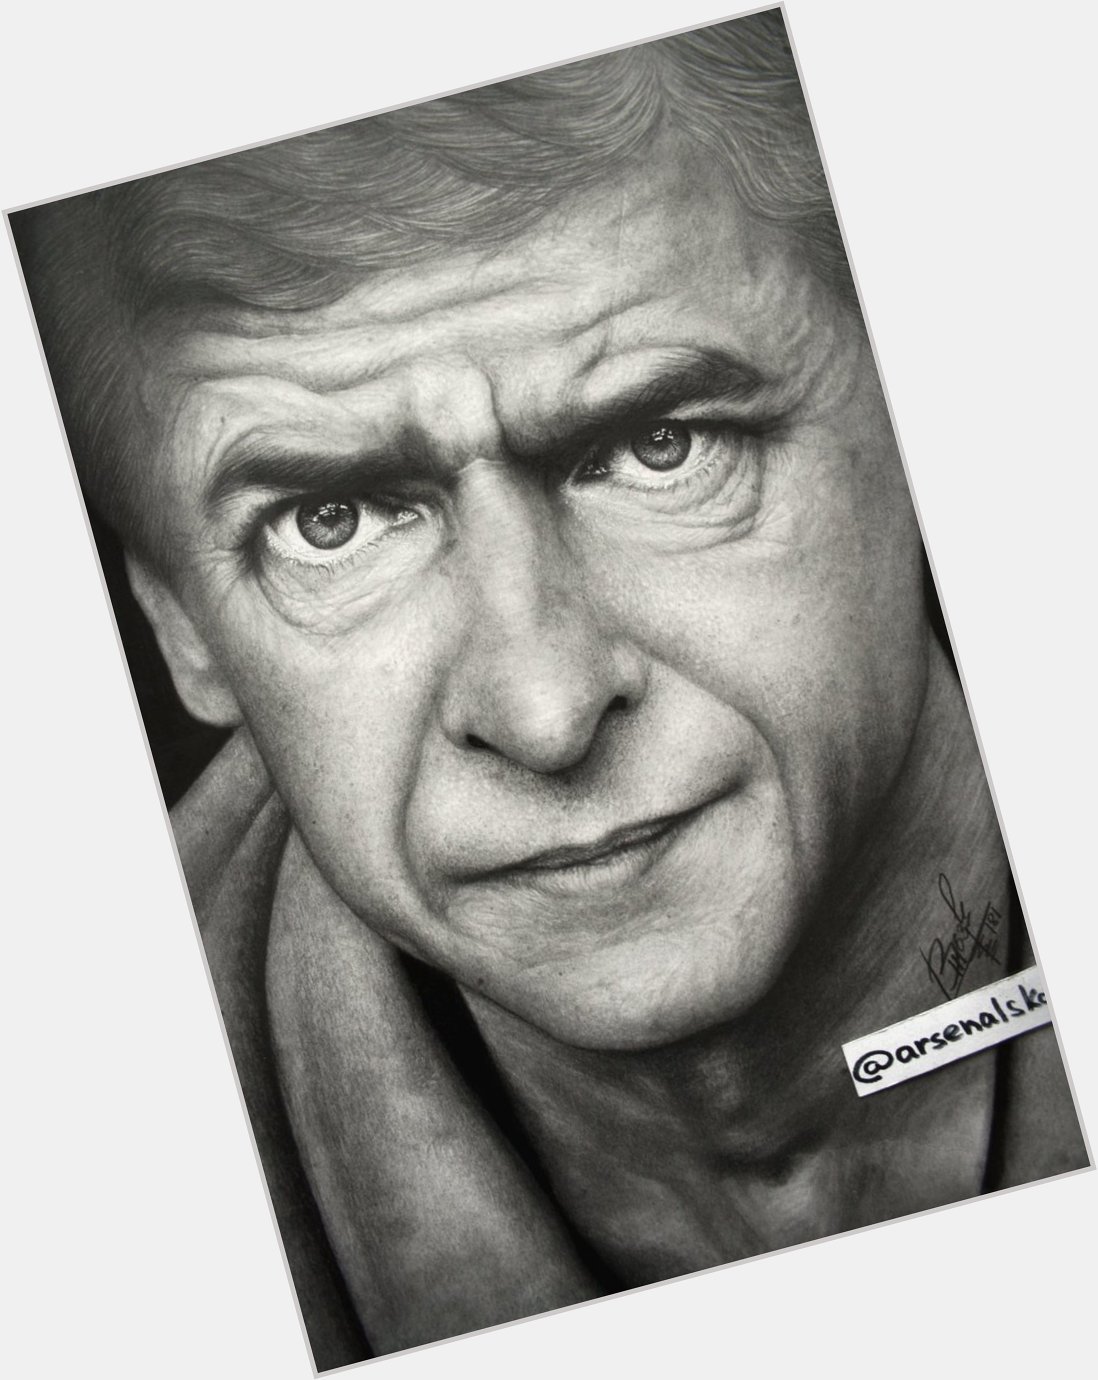 Happy 70th birthday to a man who made me fall in love with football 

My best work of Arsene Wenger   